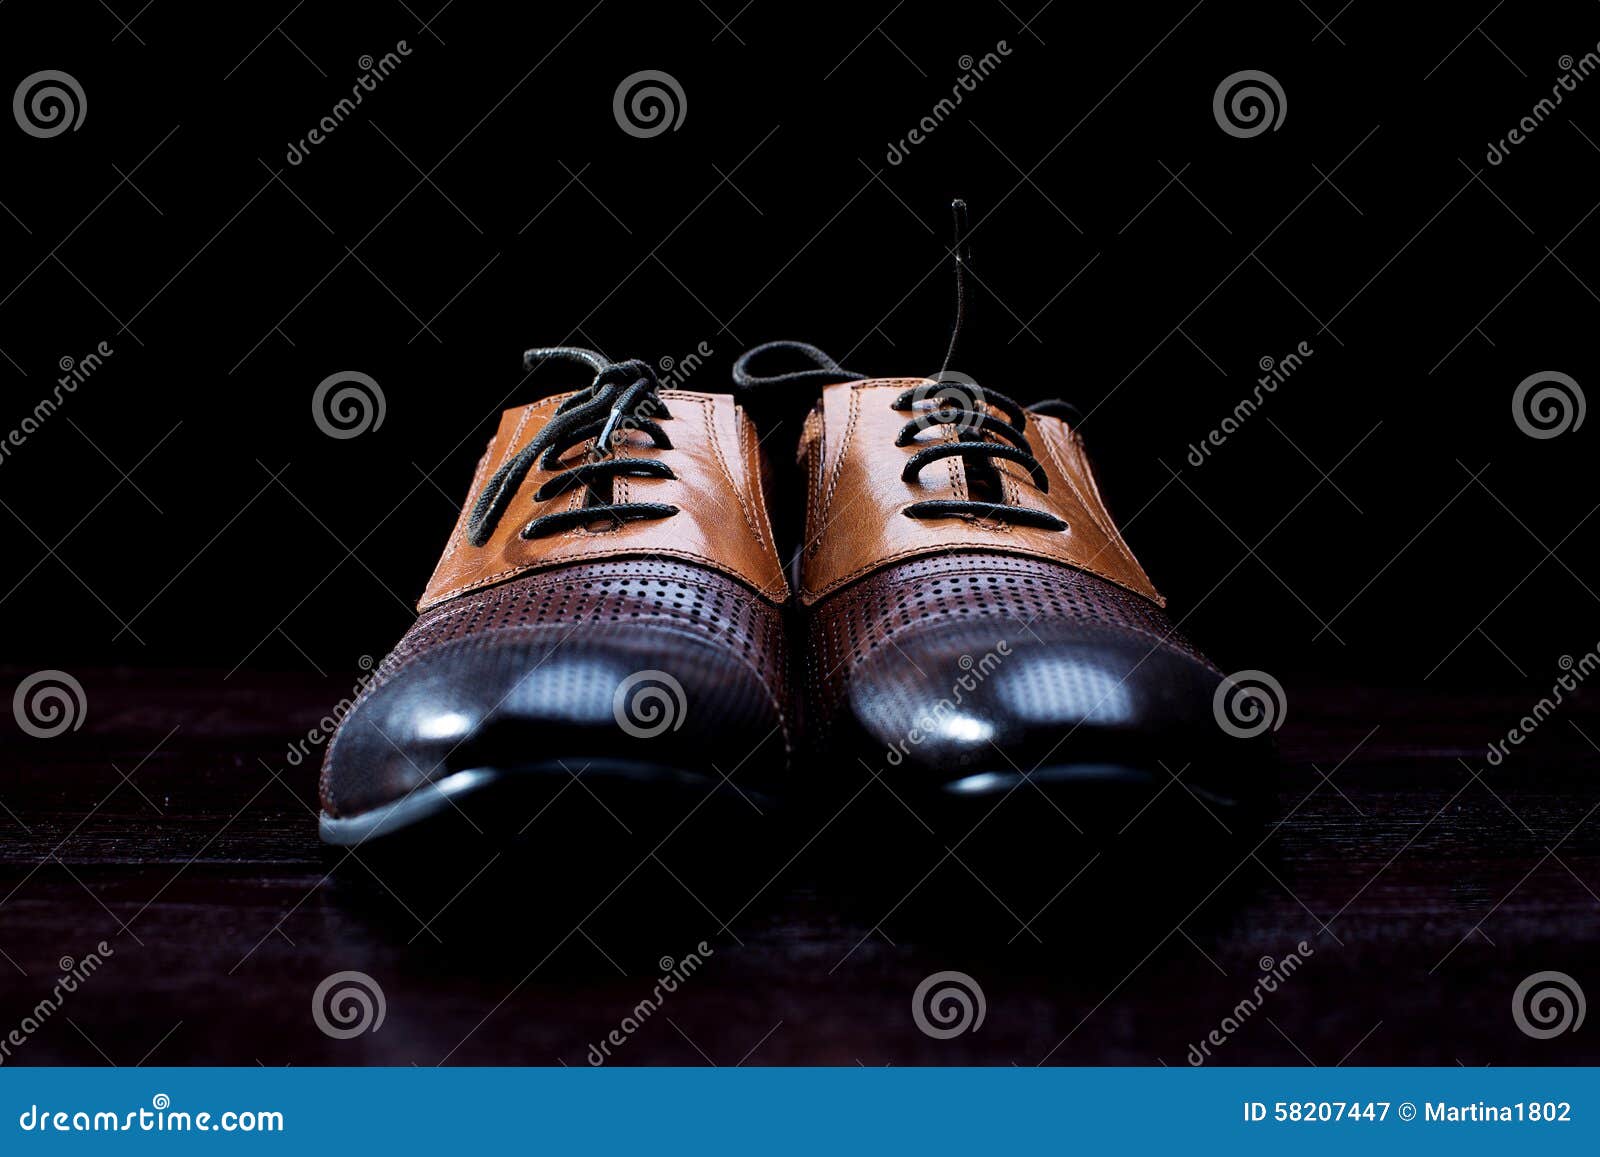 Leather Men S Shoes on Black Background Stock Image - Image of casual ...